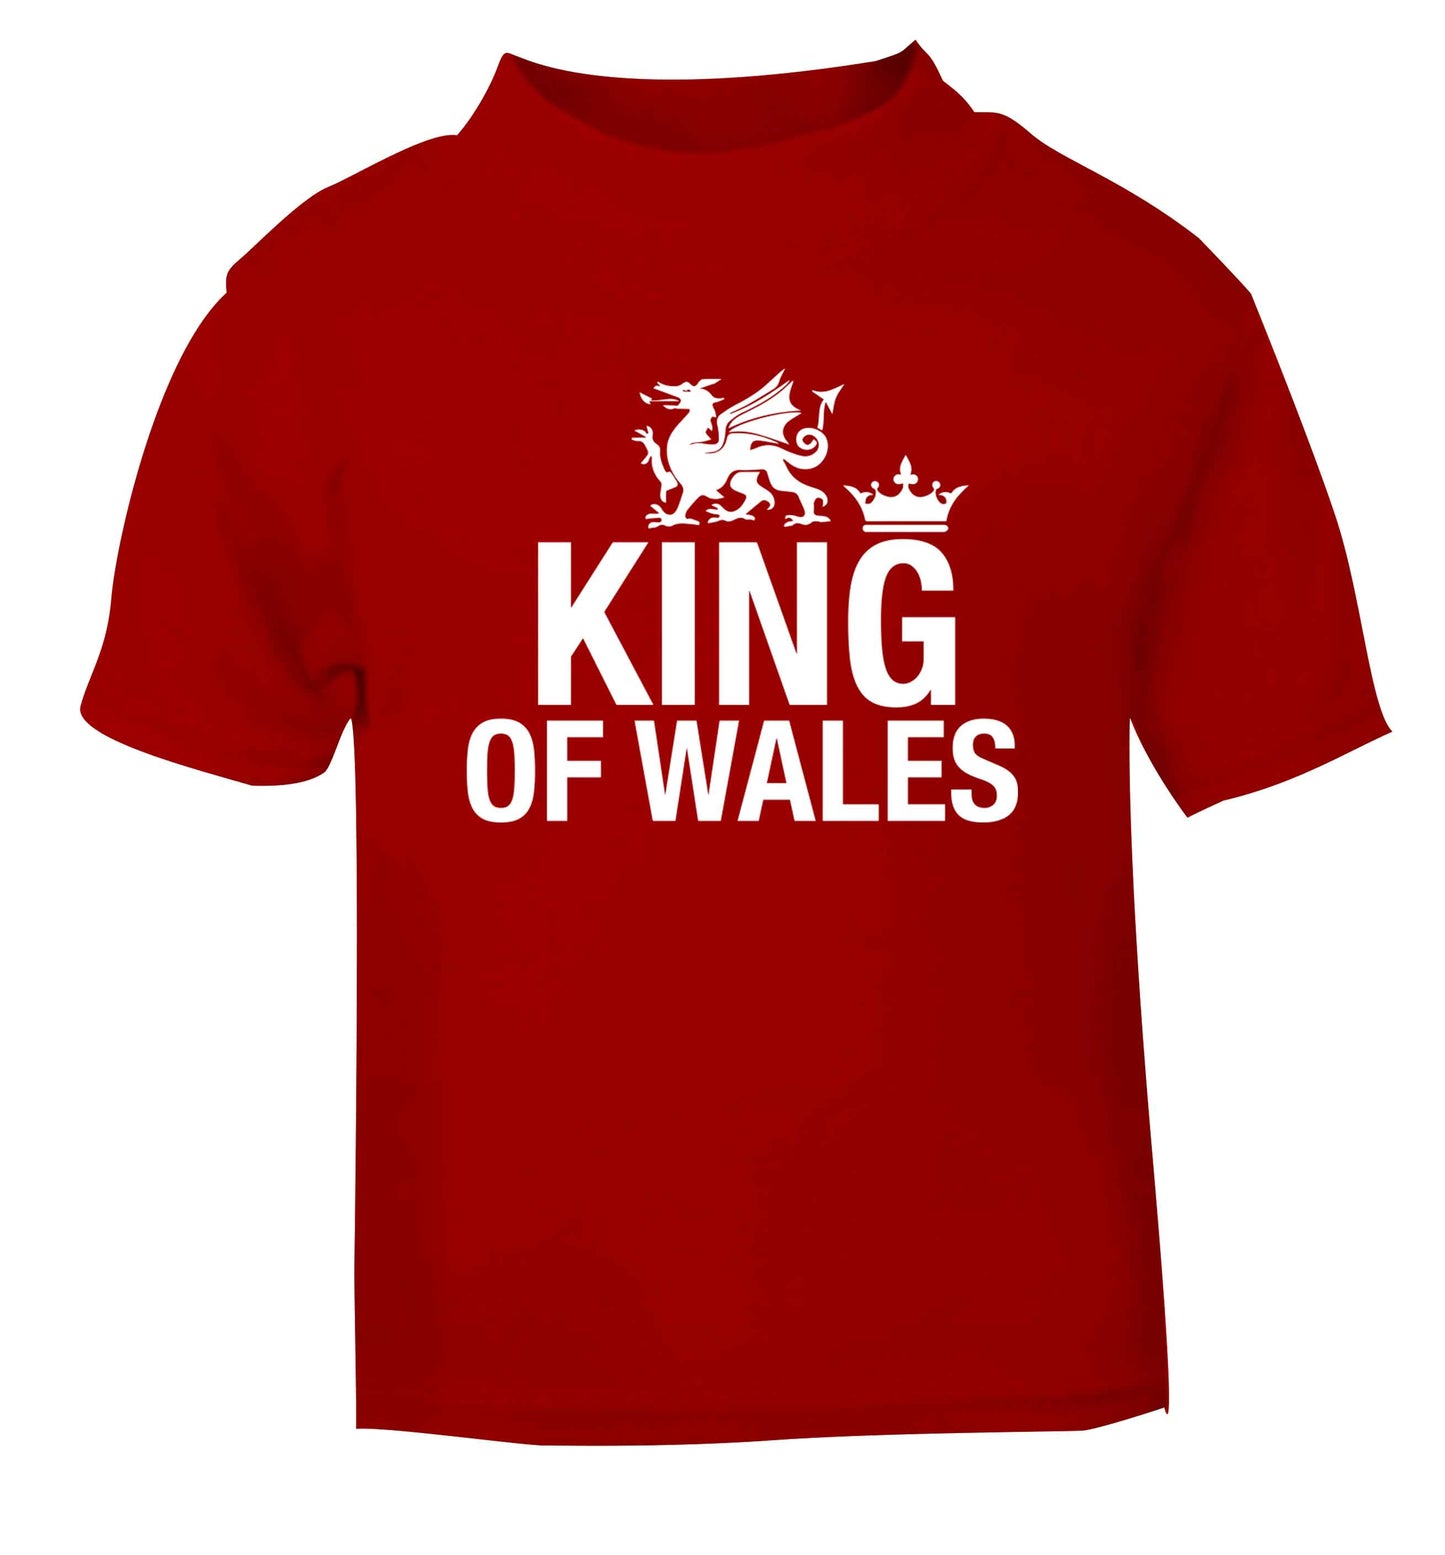 King of Wales red Baby Toddler Tshirt 2 Years